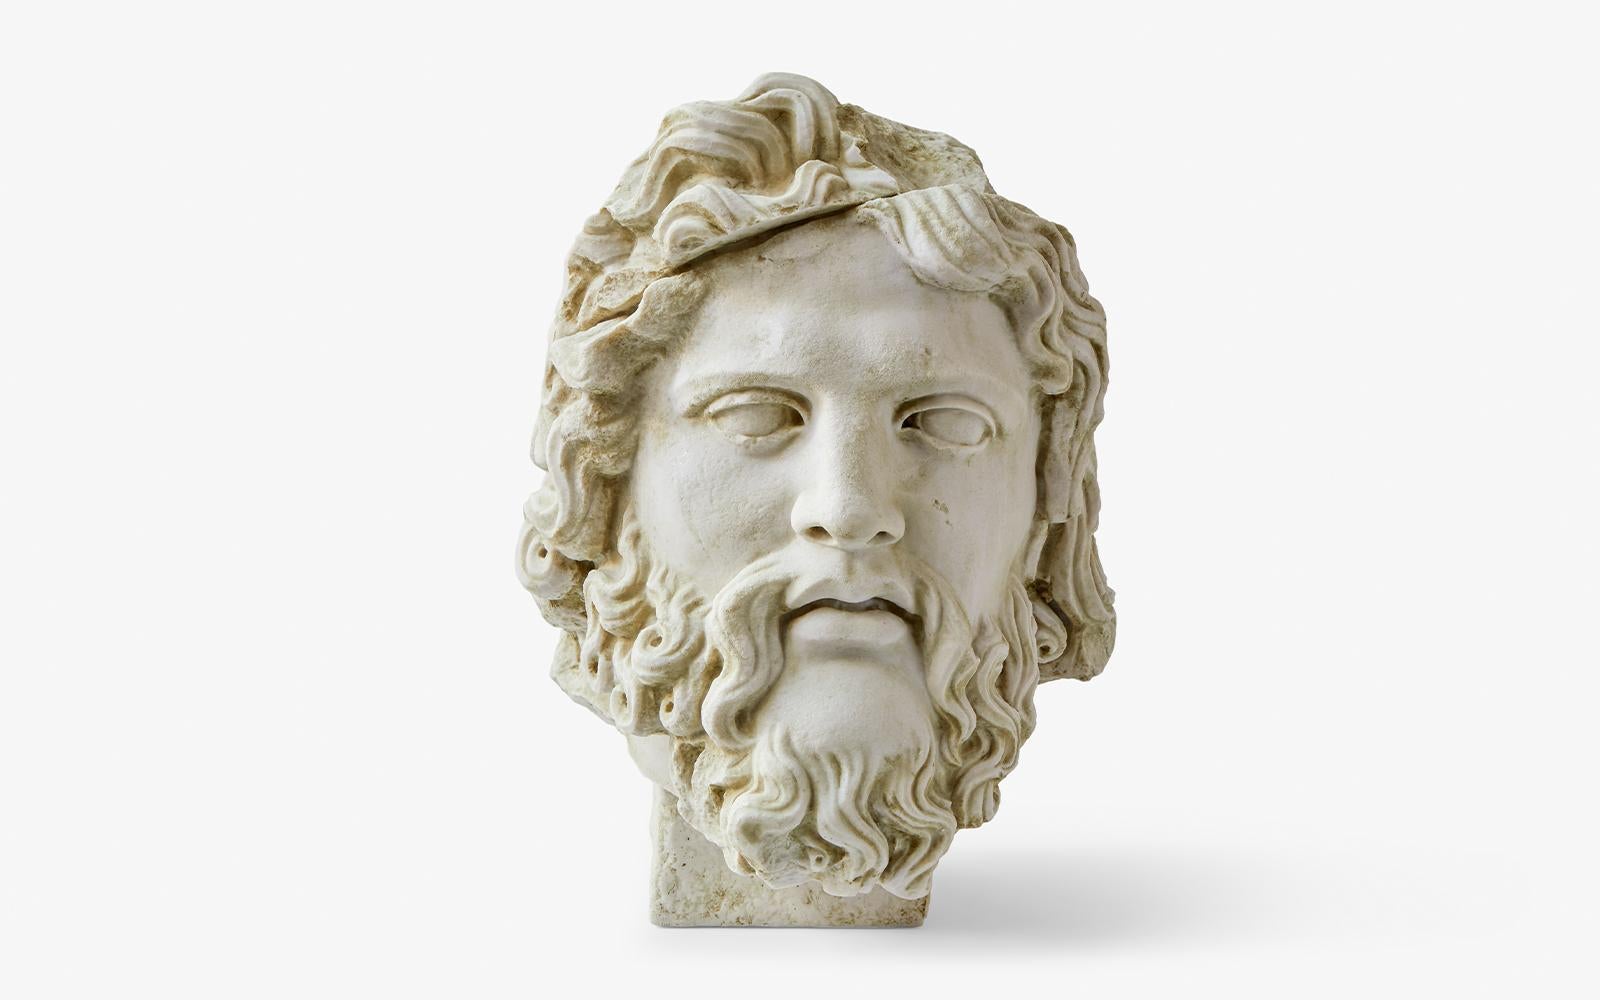 Zeus bust sculpture by Lagu.
Designed by Ufuk Ceylan.
Dimensions: W 30 x D 40 x H 43 cm.
Materials: statuary marble, cast.

Zeus is known as the father of the gods and humans in Greek mythology. He is associated with strength, bravery and